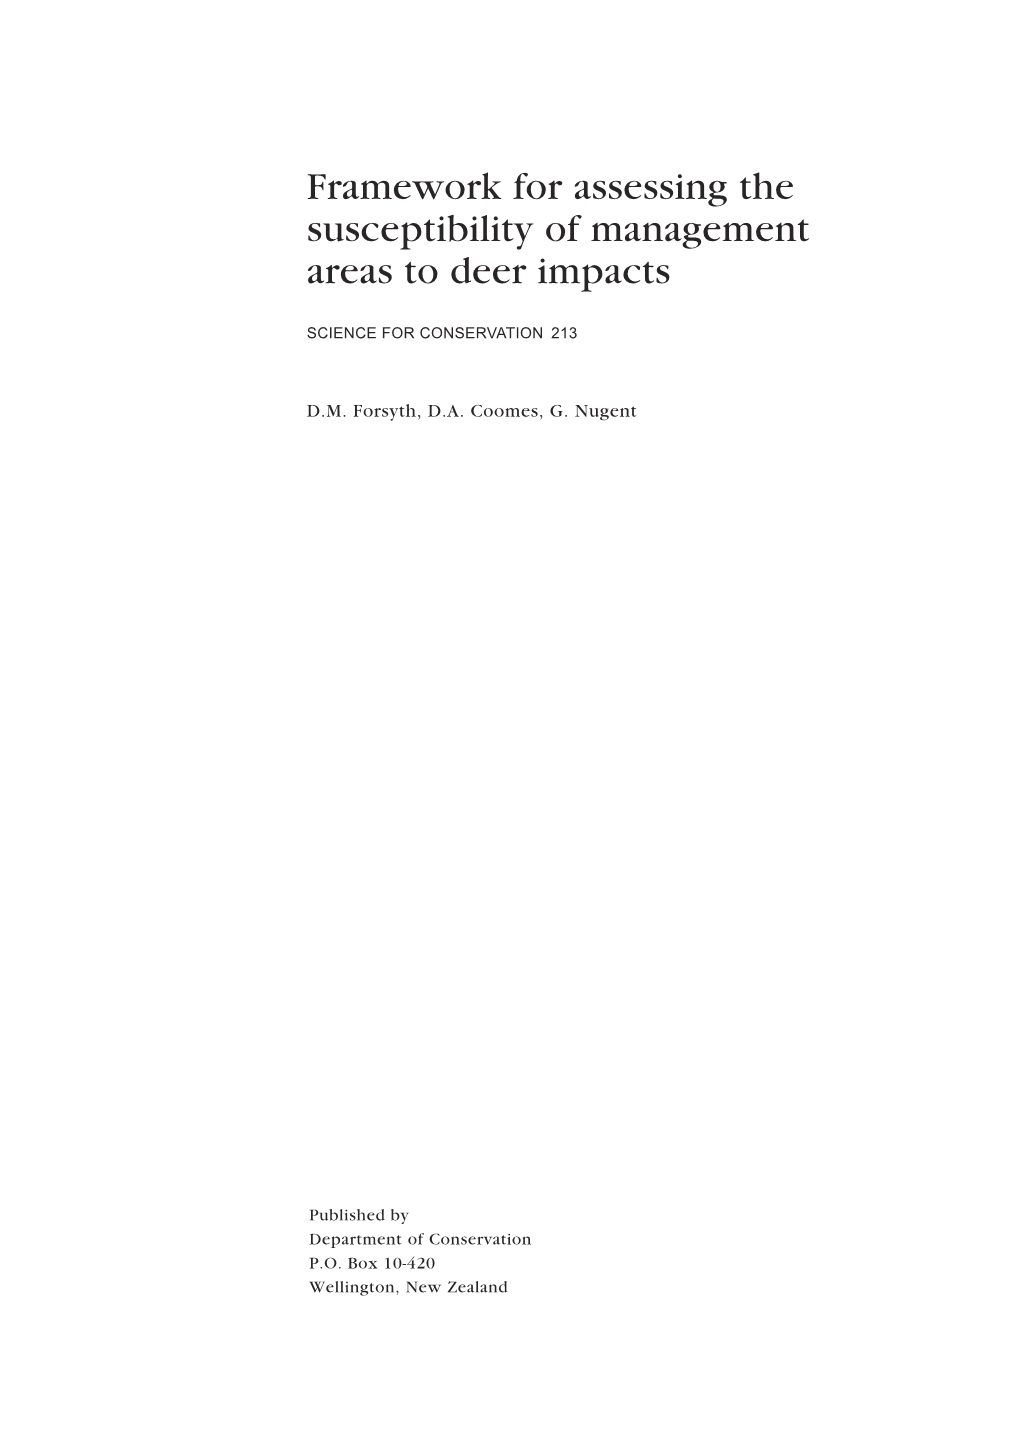 Framework for Assessing the Susceptibility of Management Areas to Deer Impacts